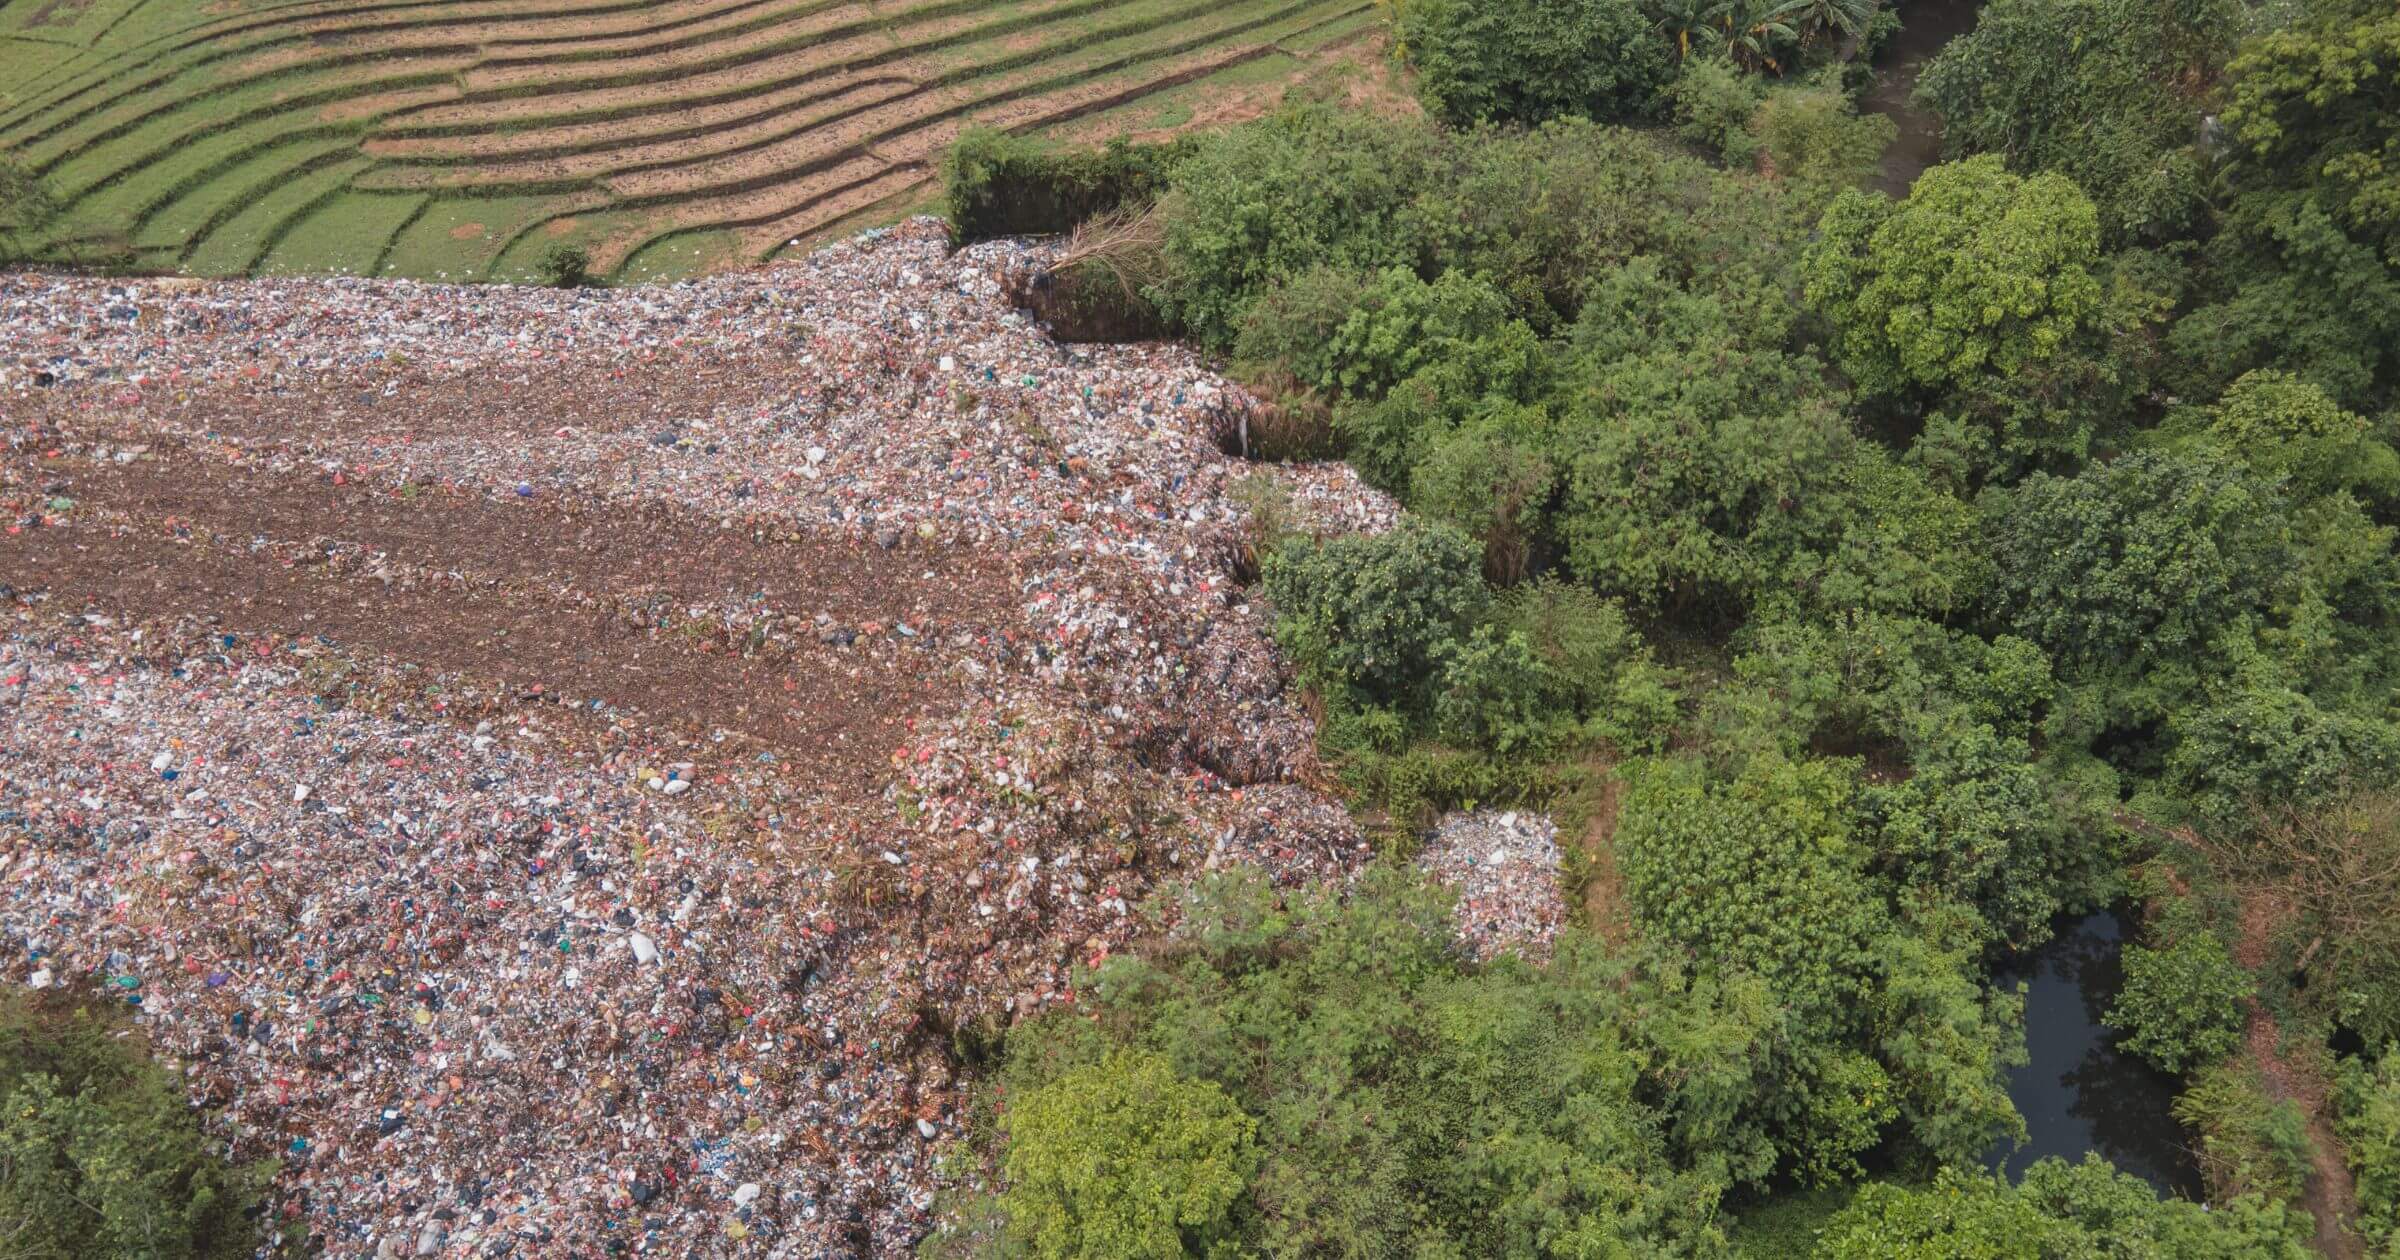 A bird's eye view of a landfill surrounded by padi fields and trees